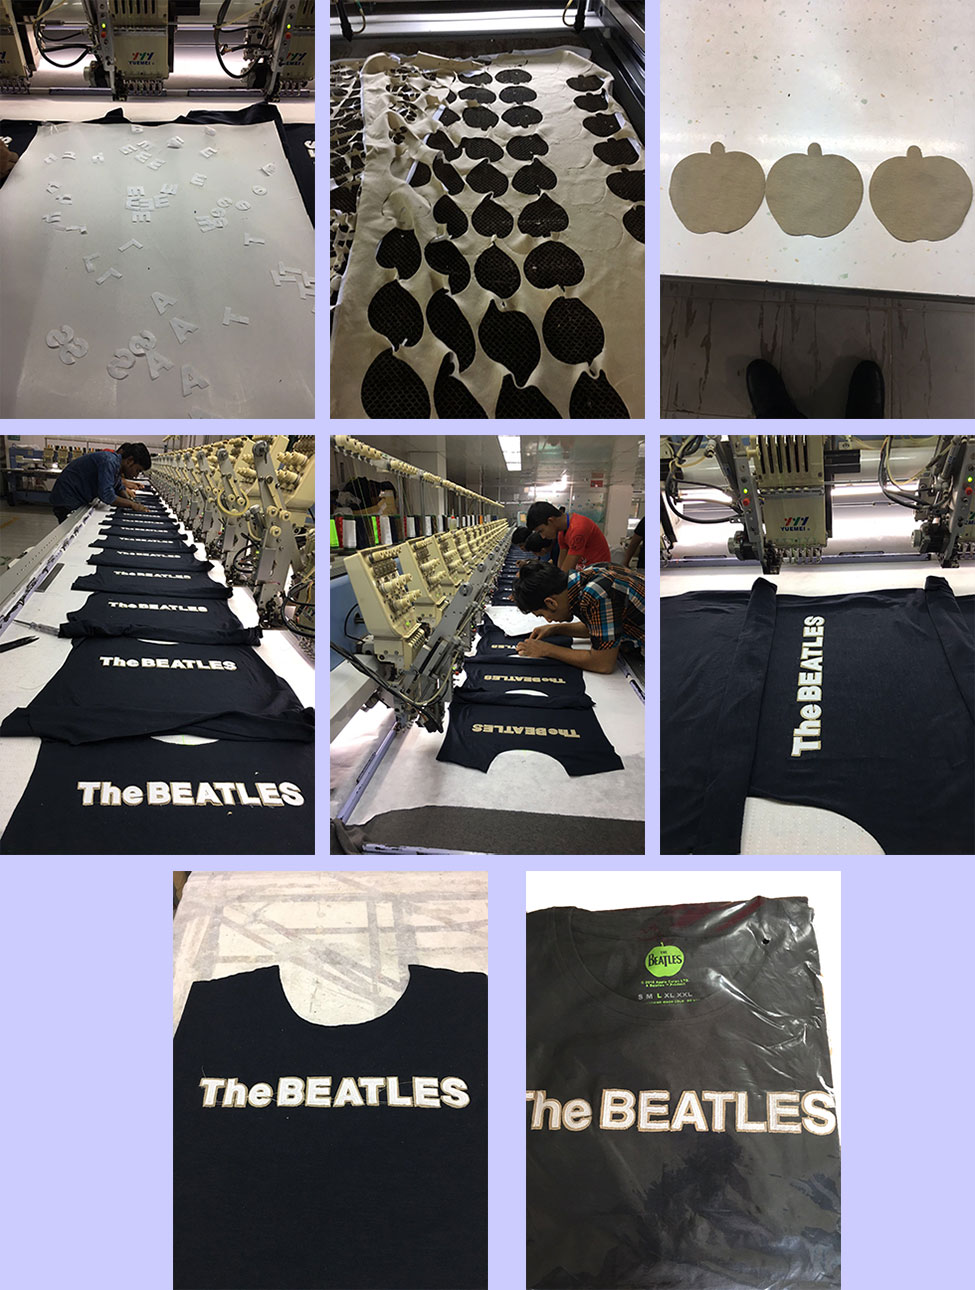 Showing how the applique tees are manufactured